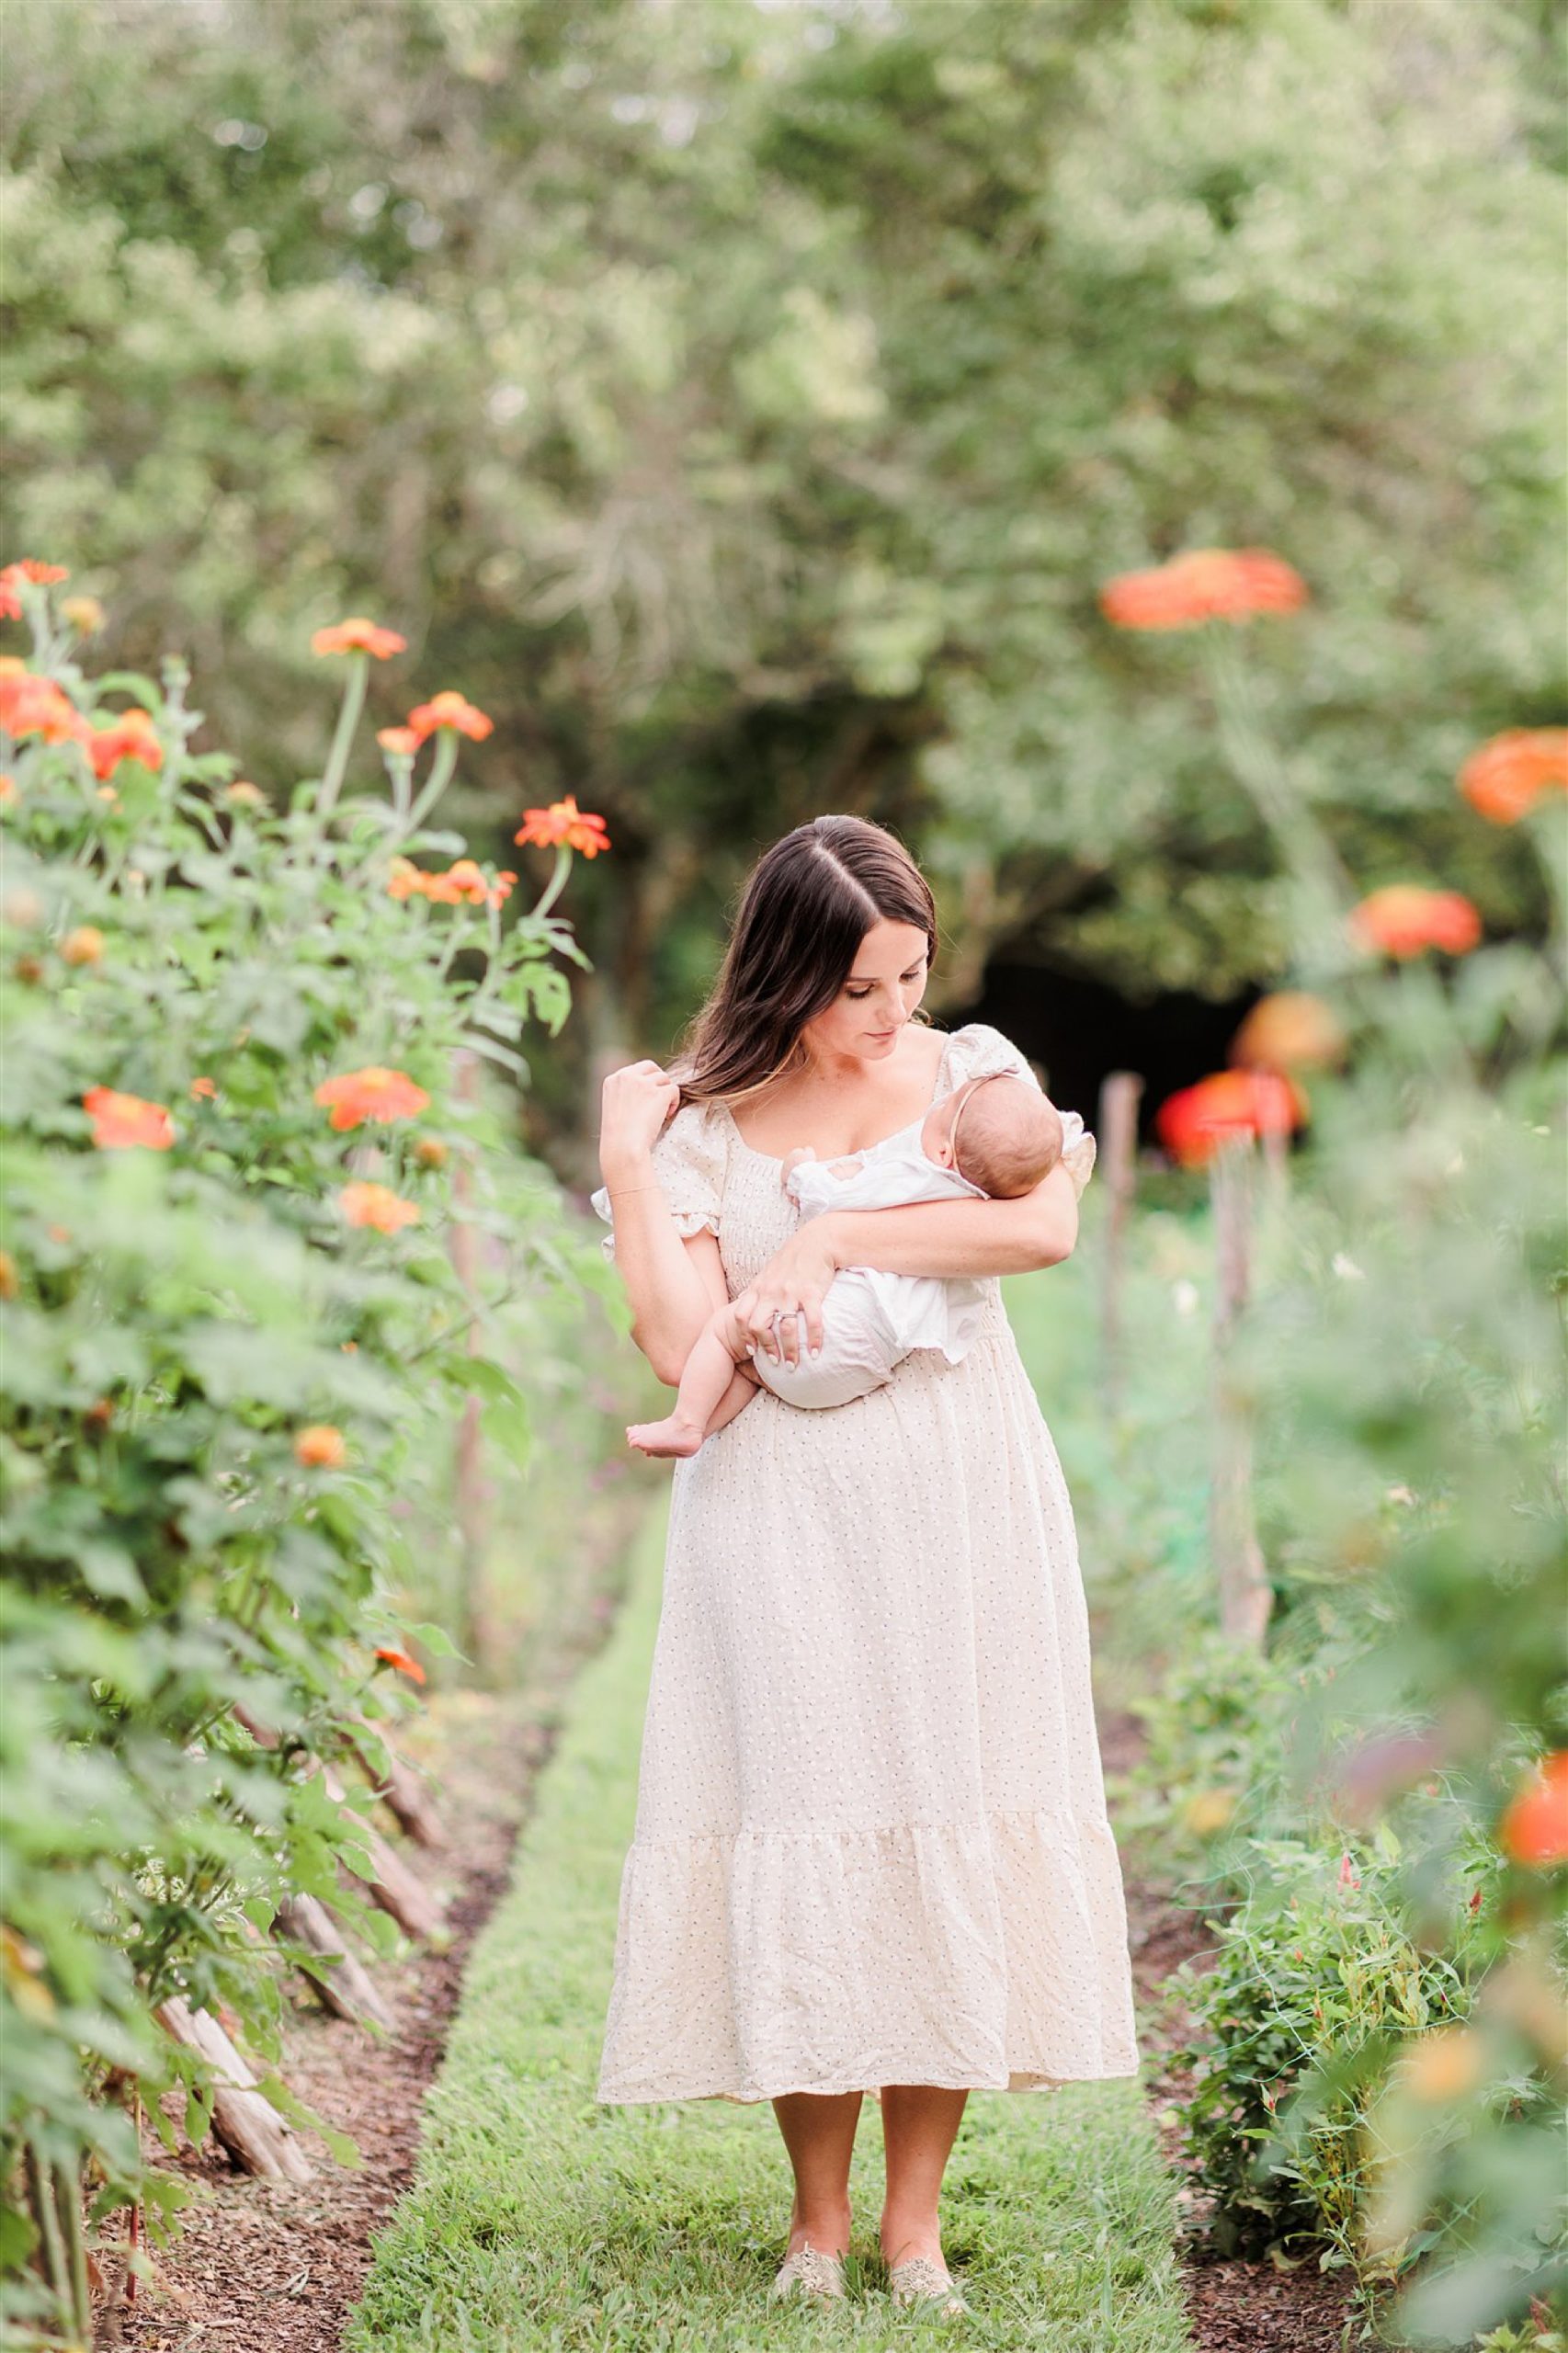 mom walks with baby through field of flowers